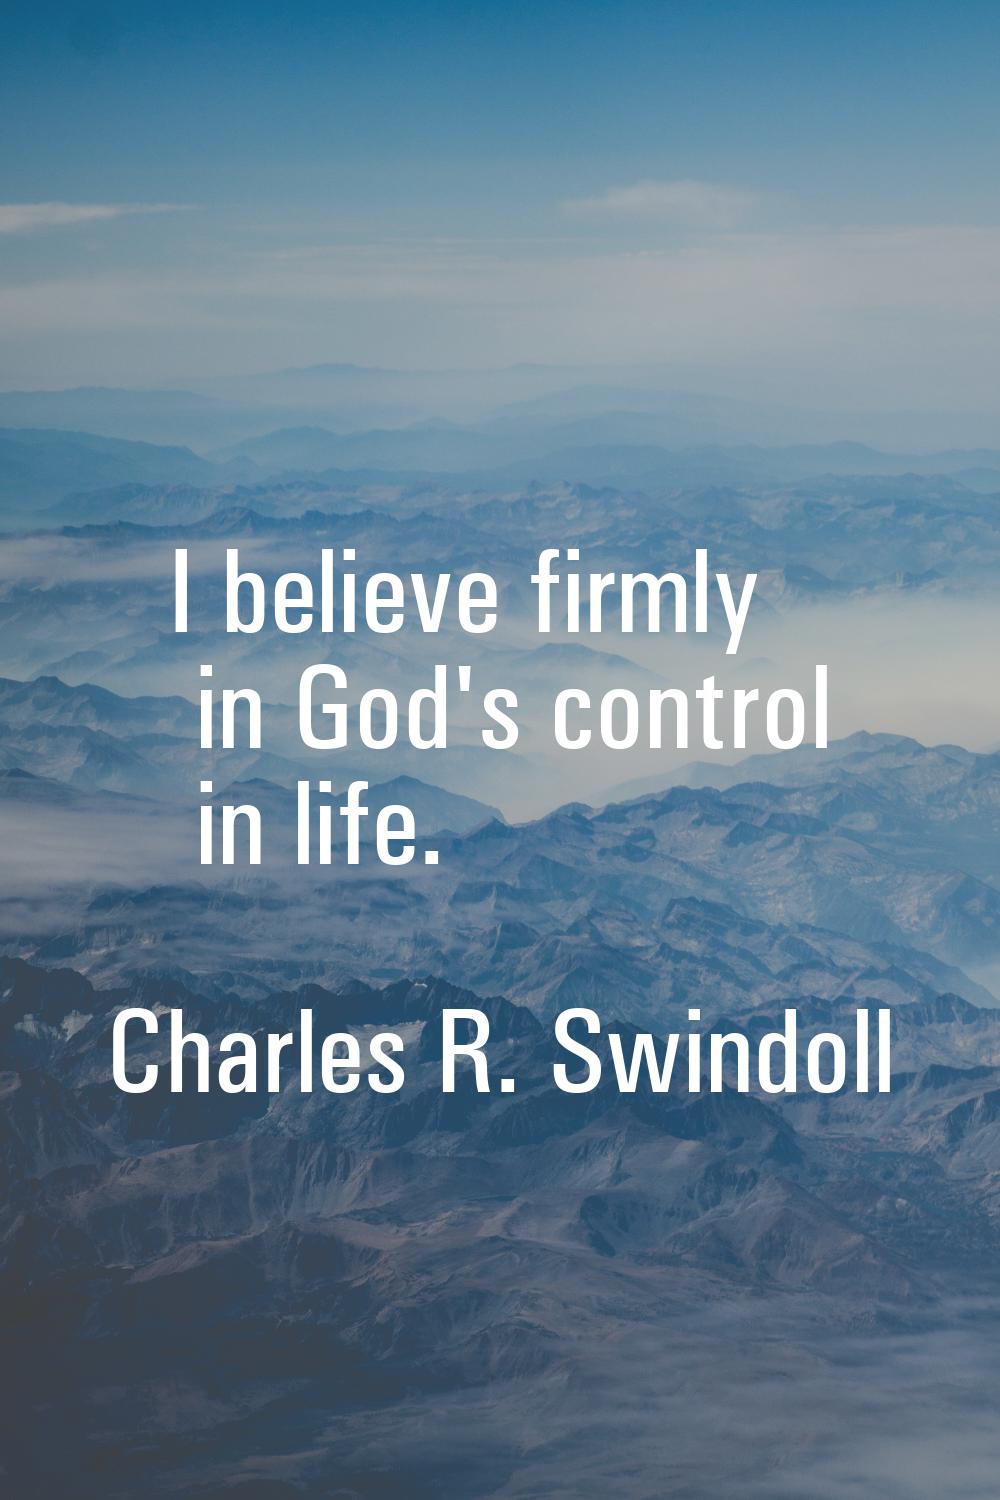 I believe firmly in God's control in life.